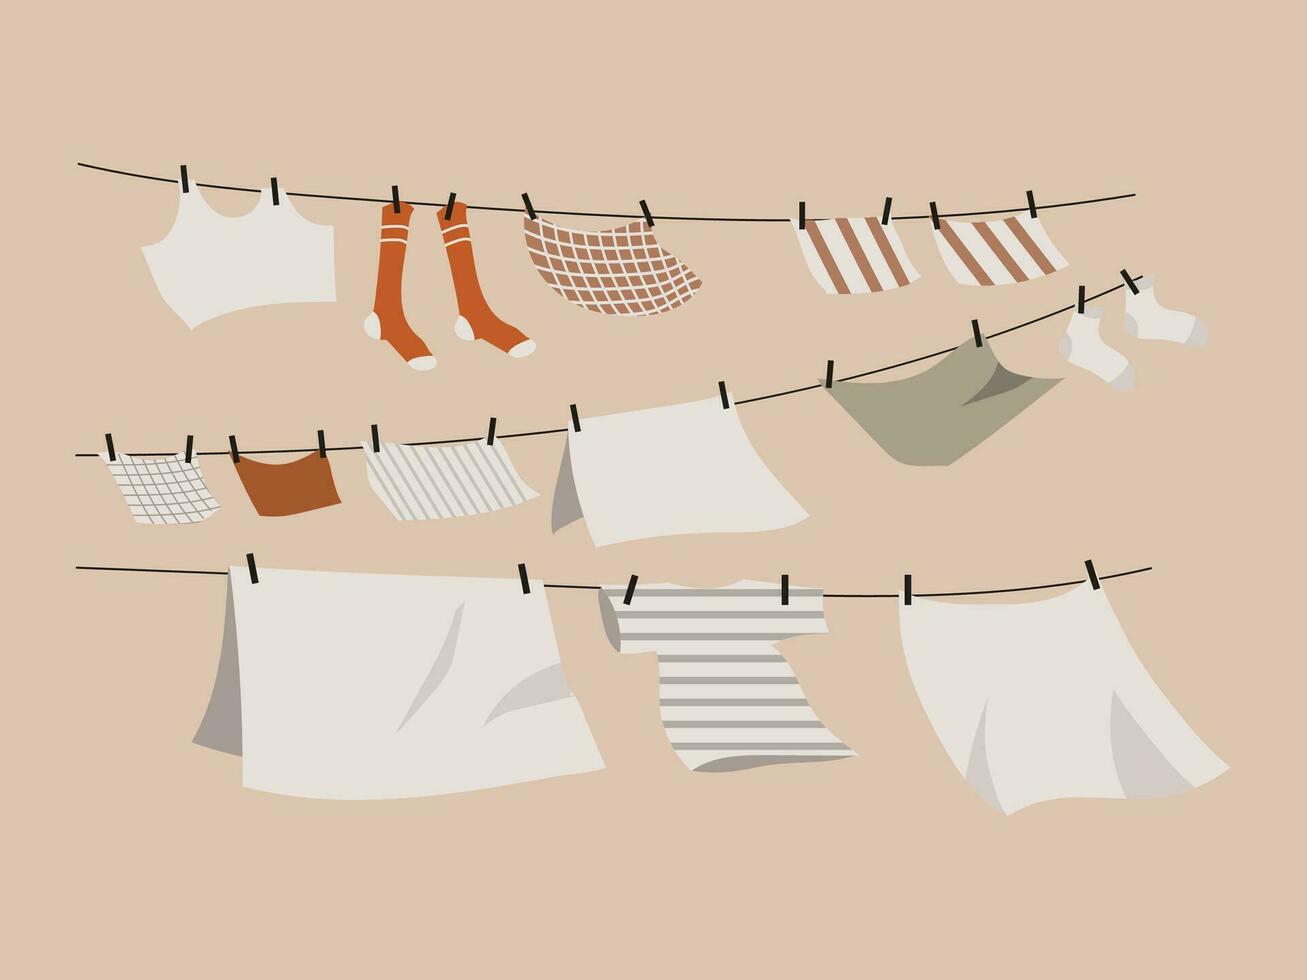 fresh clothes after washing are dried in the sun, background, light colors vector